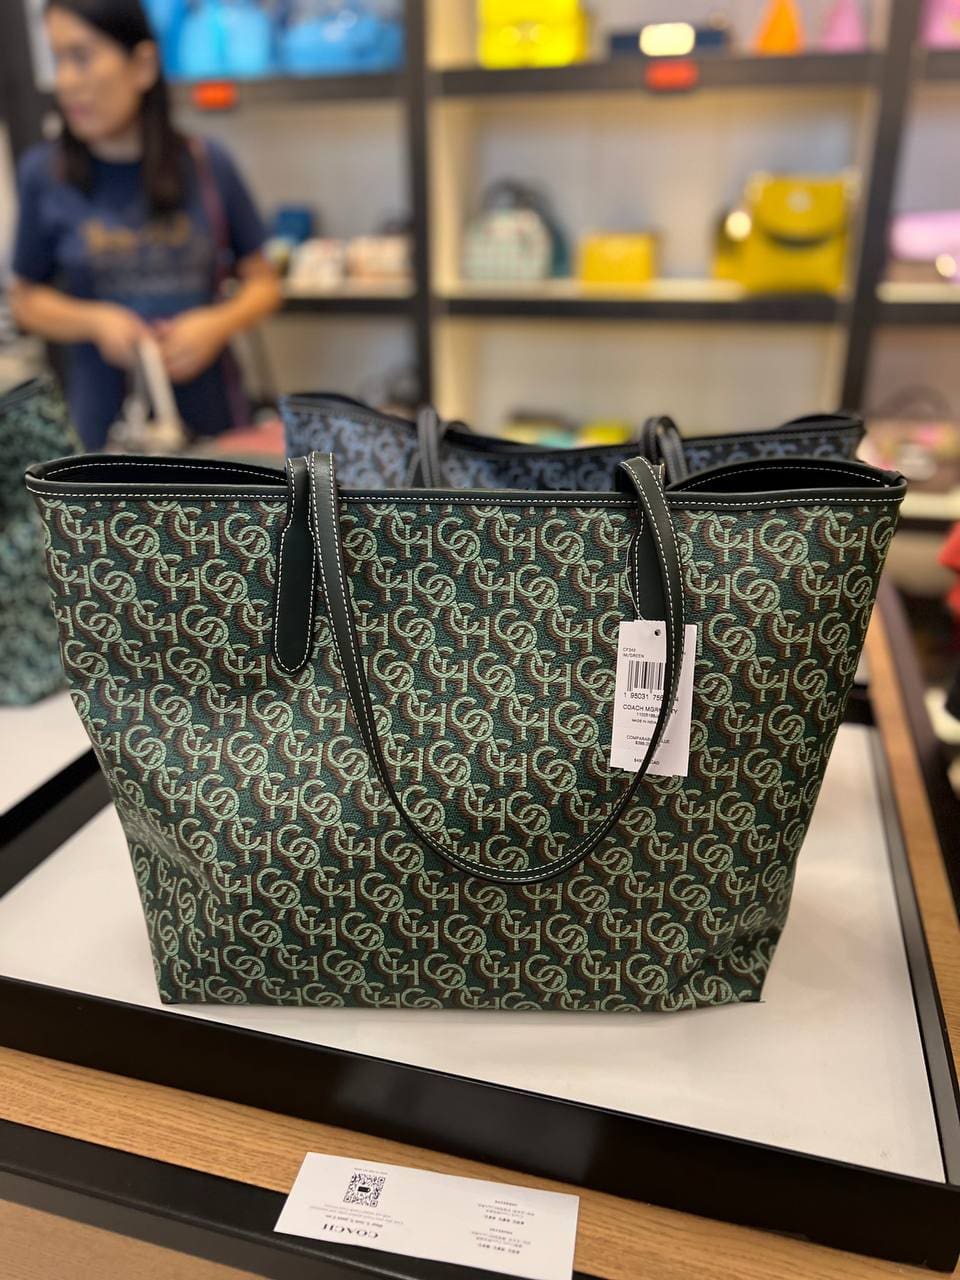 Coach CF342 City Tote With Coach Monogram Print IN Green 